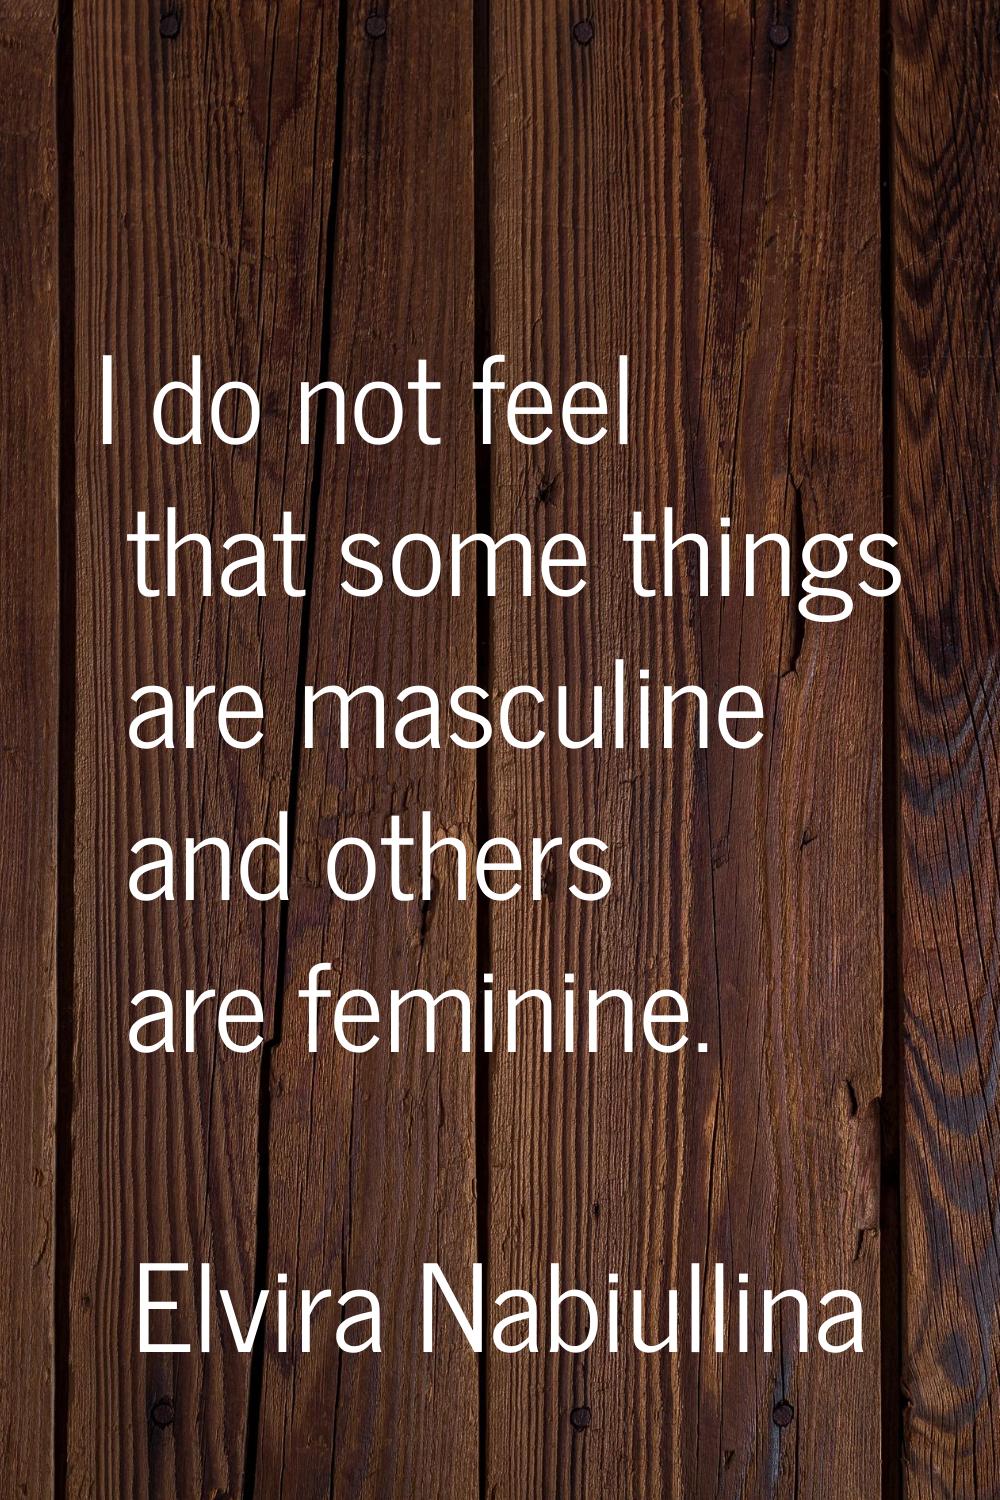 I do not feel that some things are masculine and others are feminine.